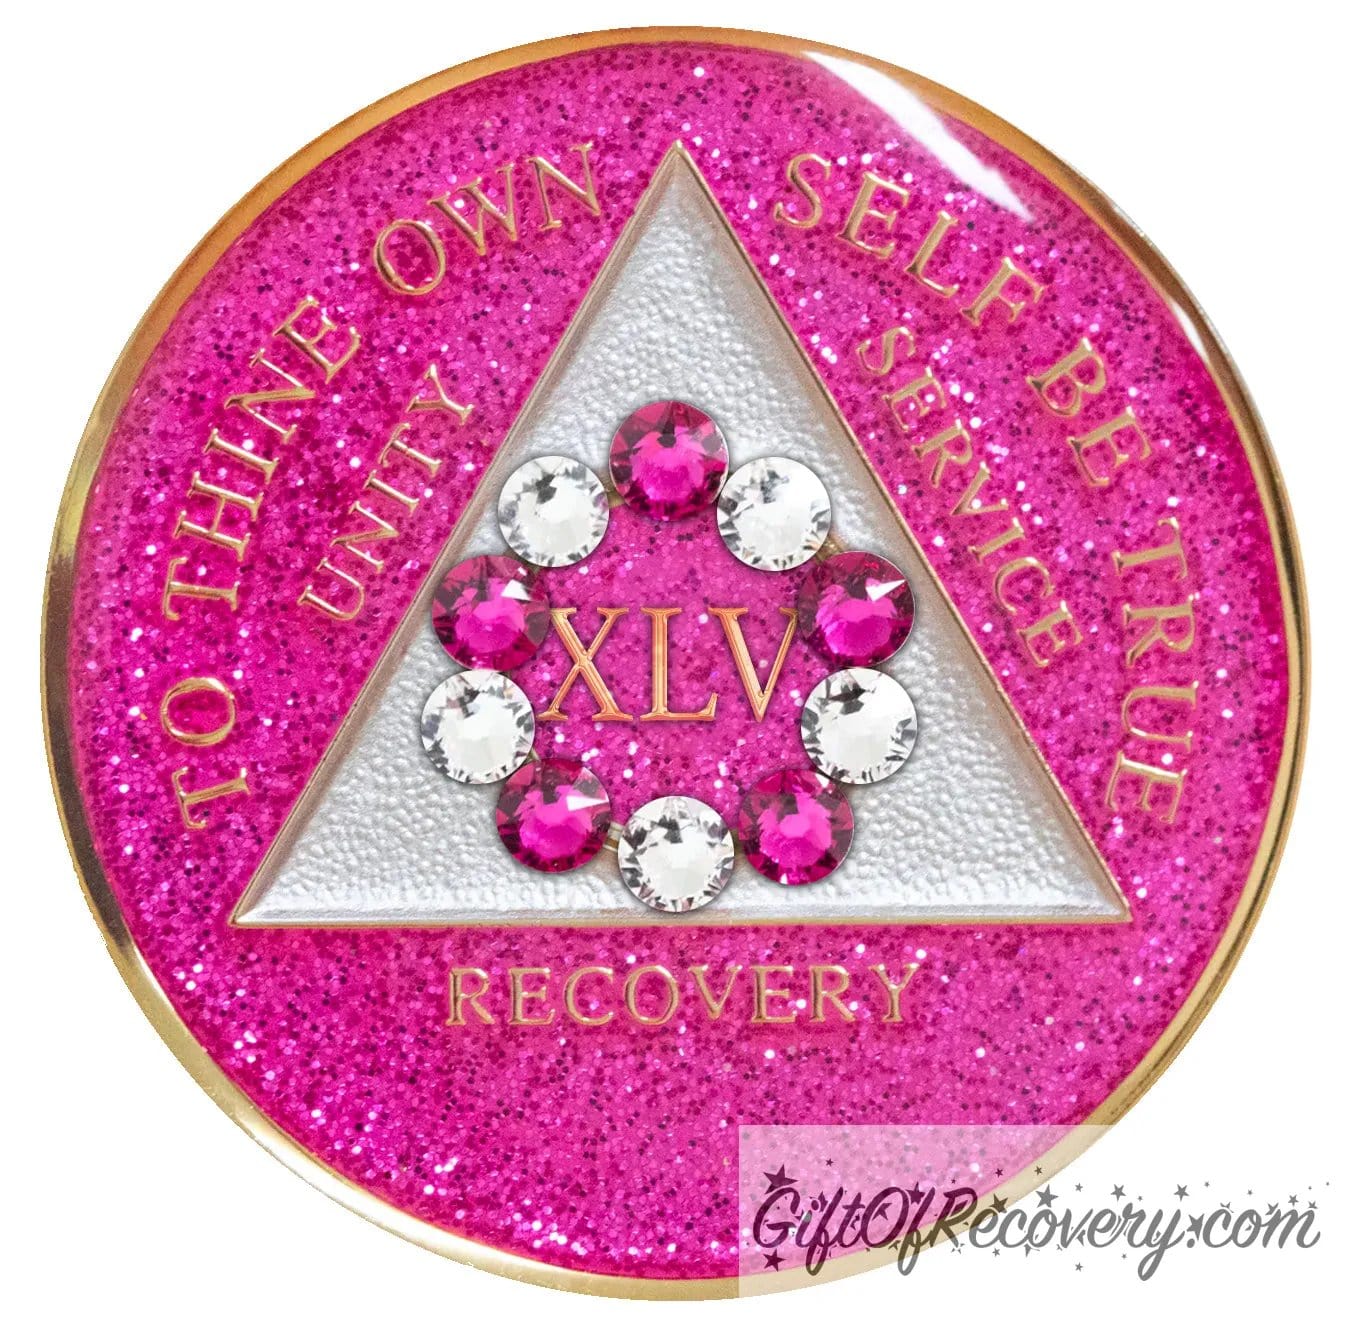 45 Year princess pink glitter 10th step AA medallion with 5 pink genuine crystals and 5 clear genuine crystal, formed in a circle around the year, to thine own self be true, triangle in the center and unity, service, recovery, along with rim of medallion are slightly raised in 14k gold, the center of the triangle is pearl white with the circle being pink glitter, all emphasizing action and reflection, for your favorite sober princess.